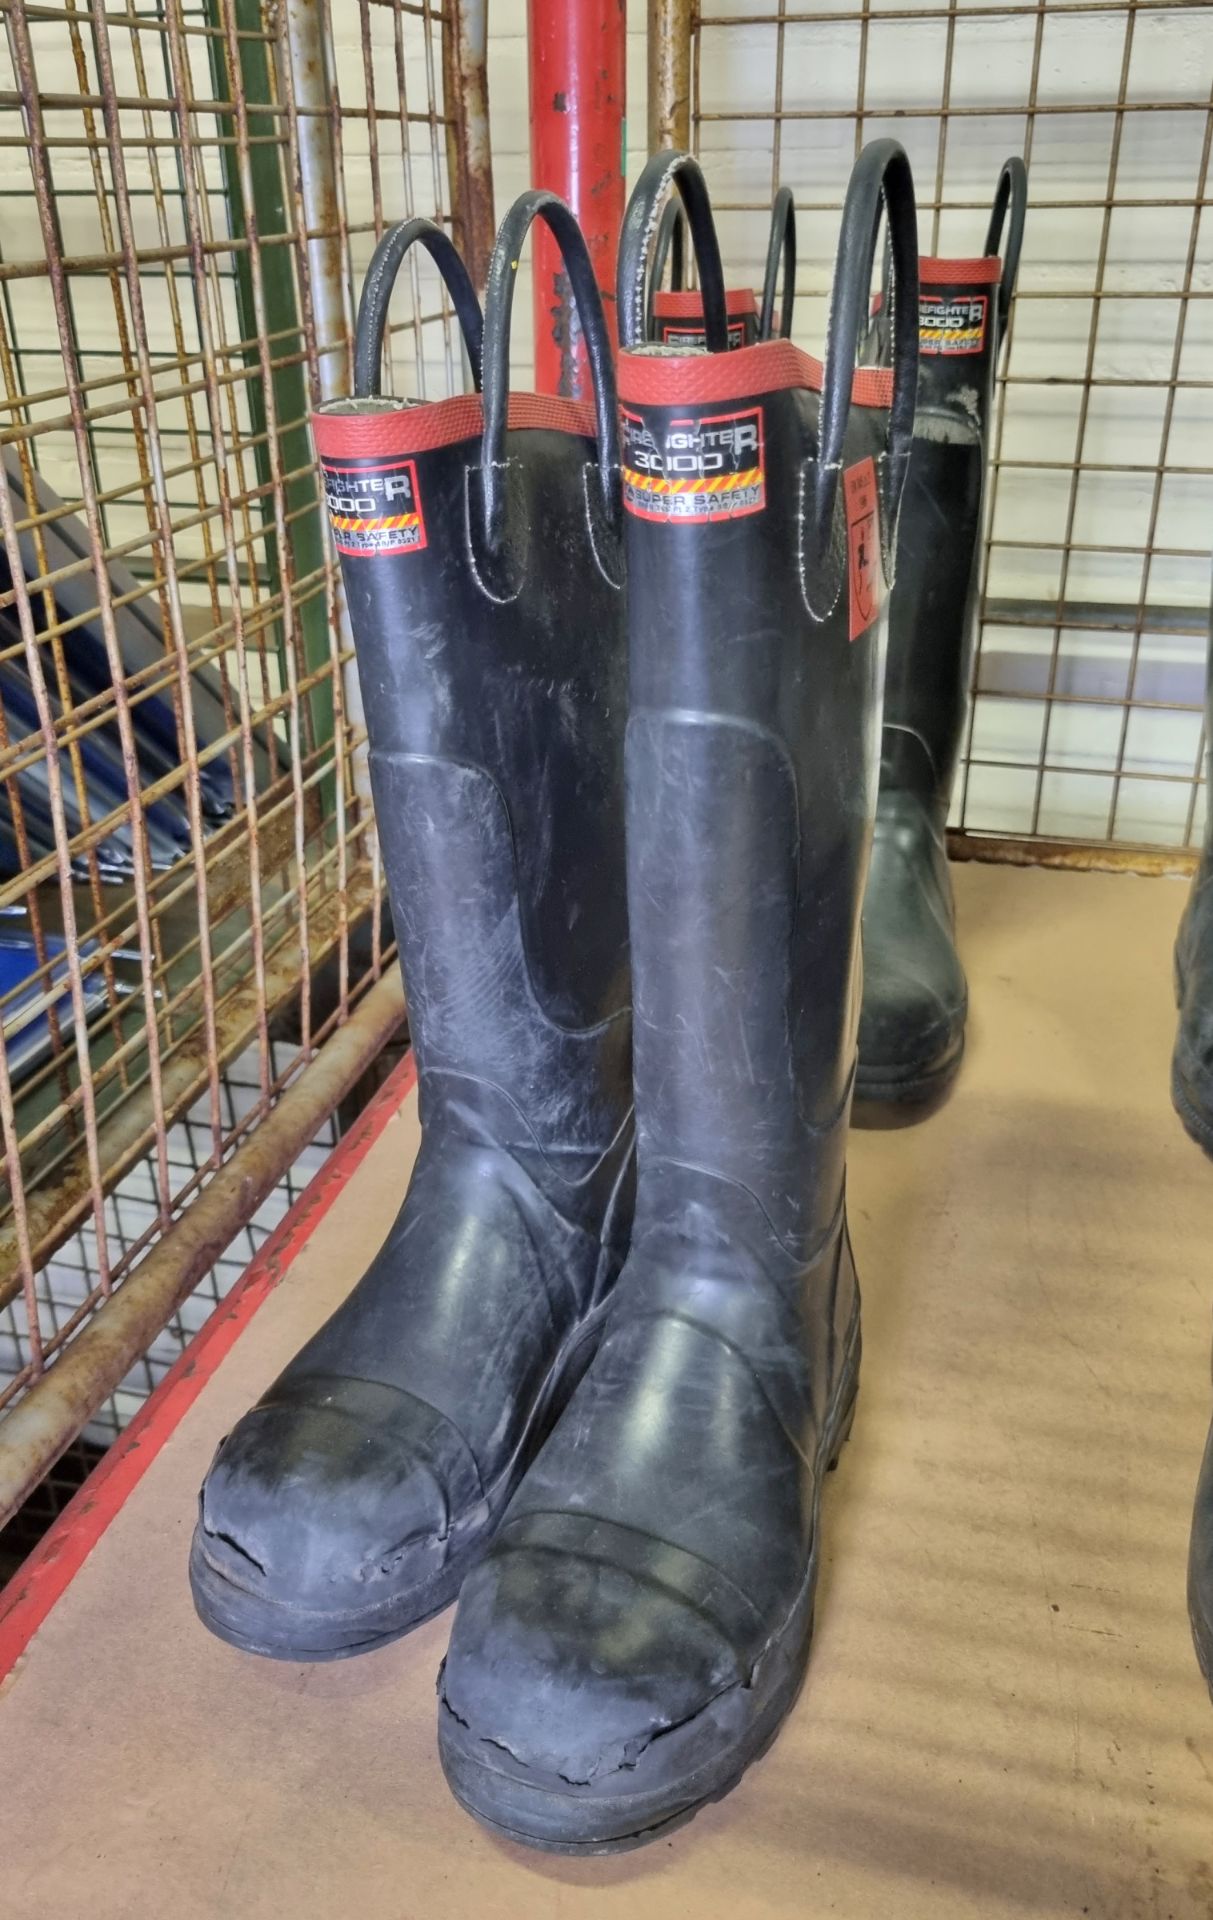 3x FF 3000 rubber safety boot - size 4, FF 3000 rubber safety boot - size 6, FF 3000 rubber safety b - Image 3 of 6